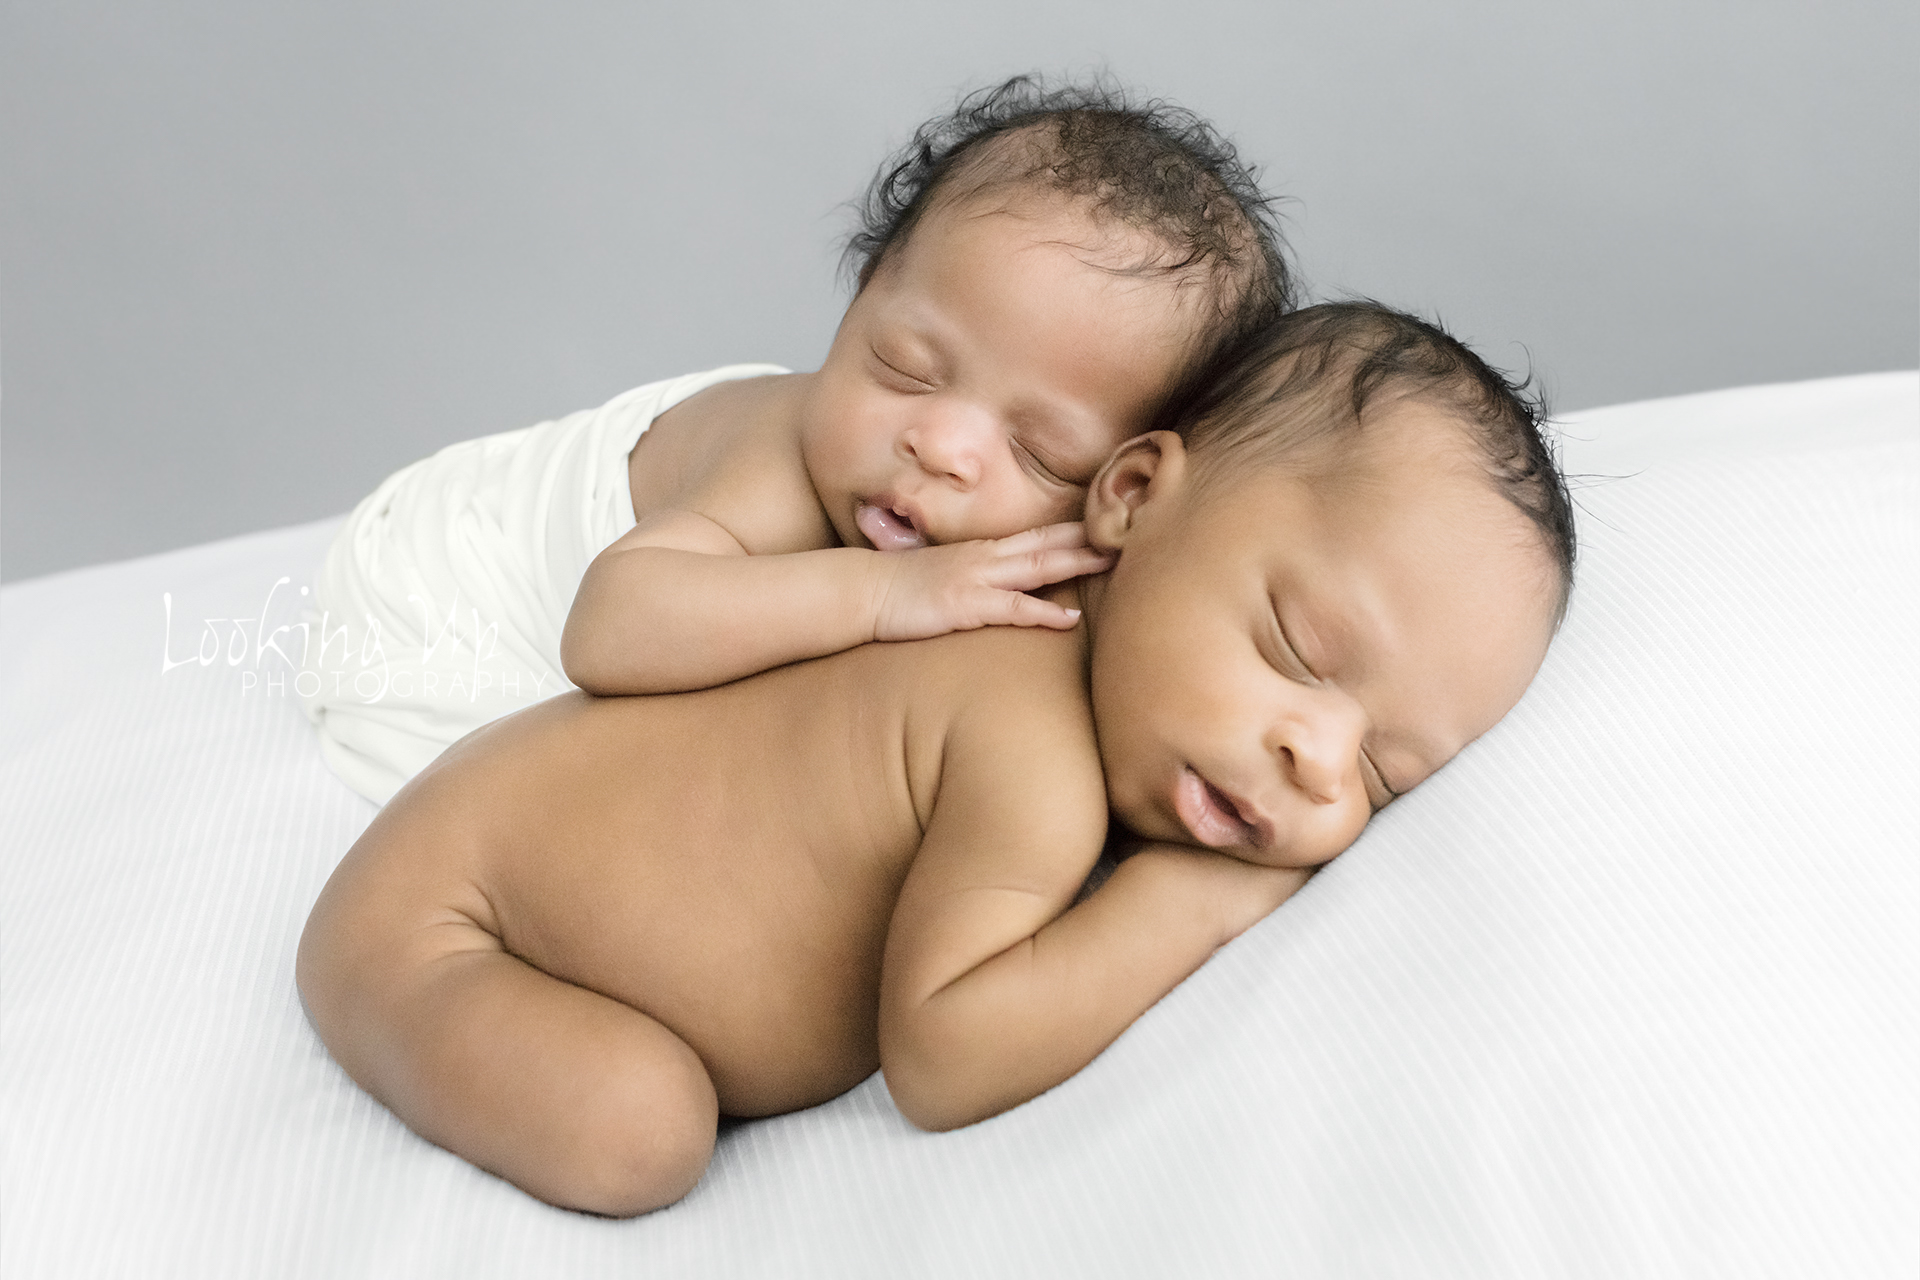 Double the Blessings (Darien Infant Photography)